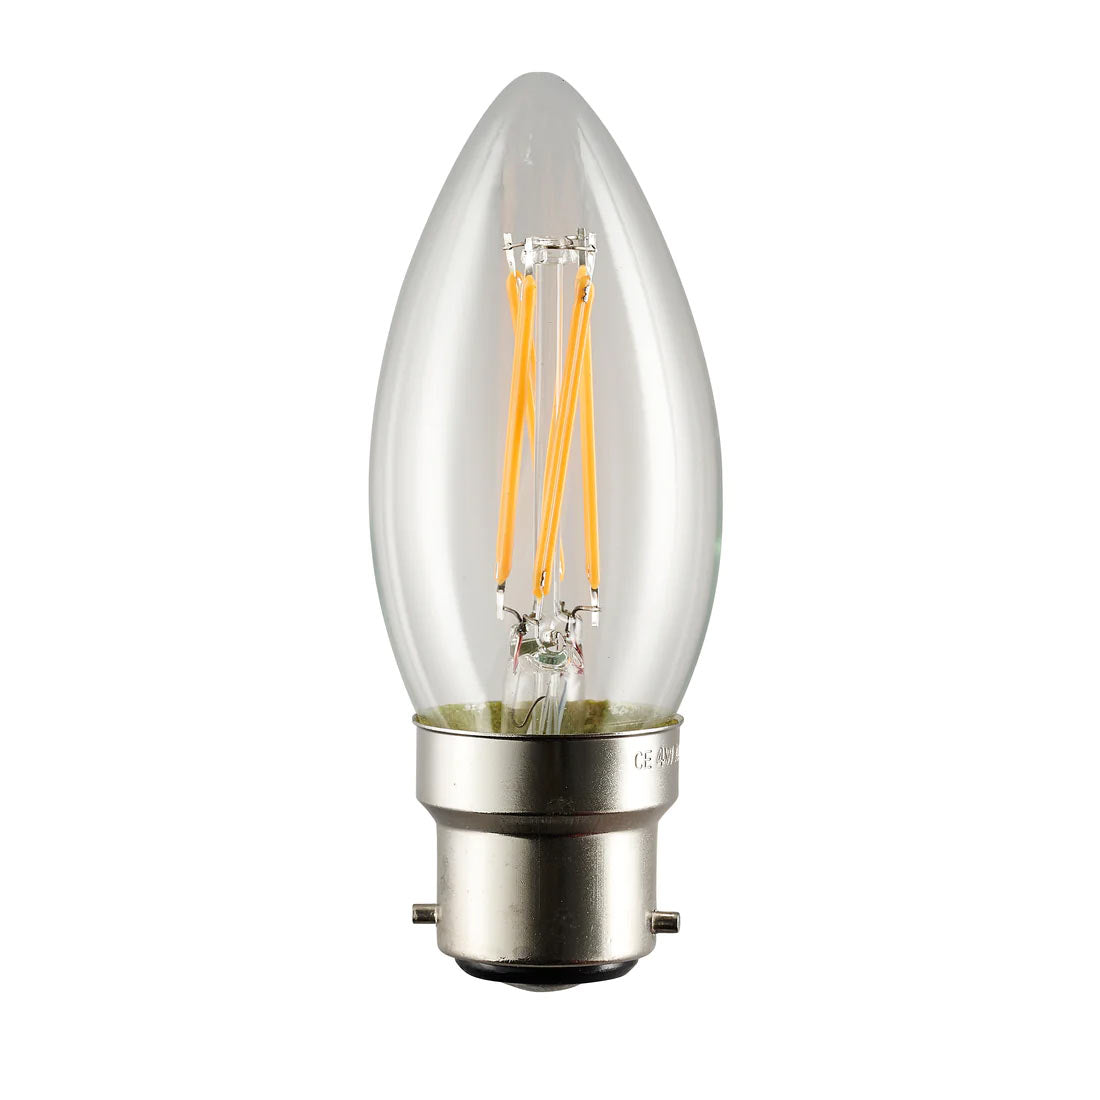 Iris LED Candle Bulb in Sizes B15 and B22, sold by South Charlotte Fine Lighting